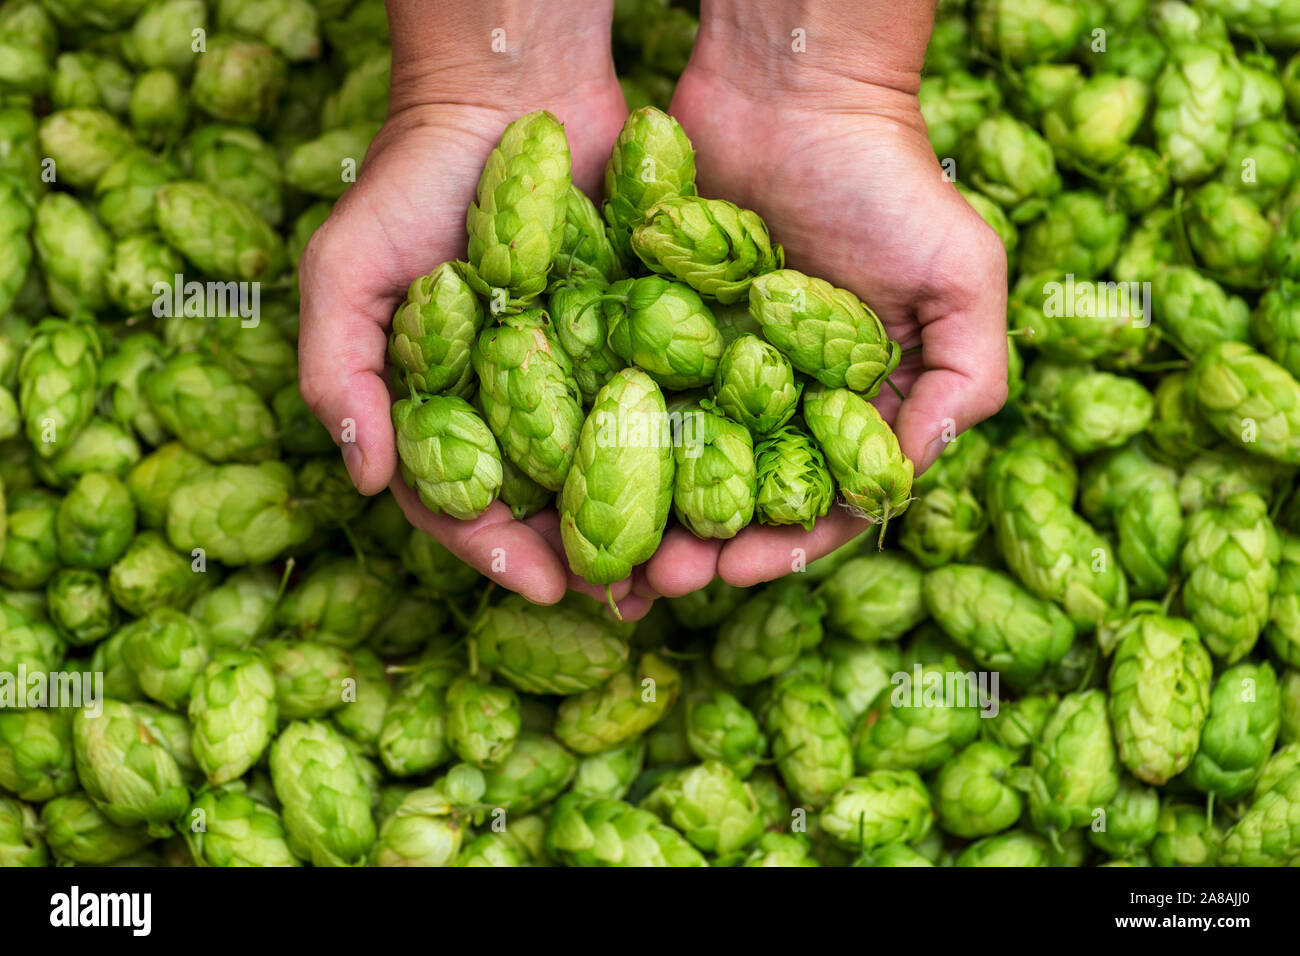 Green hops for beer. Man holding fresh hop in his hands. Craft beer ingredients at a brewery. Stock Photo